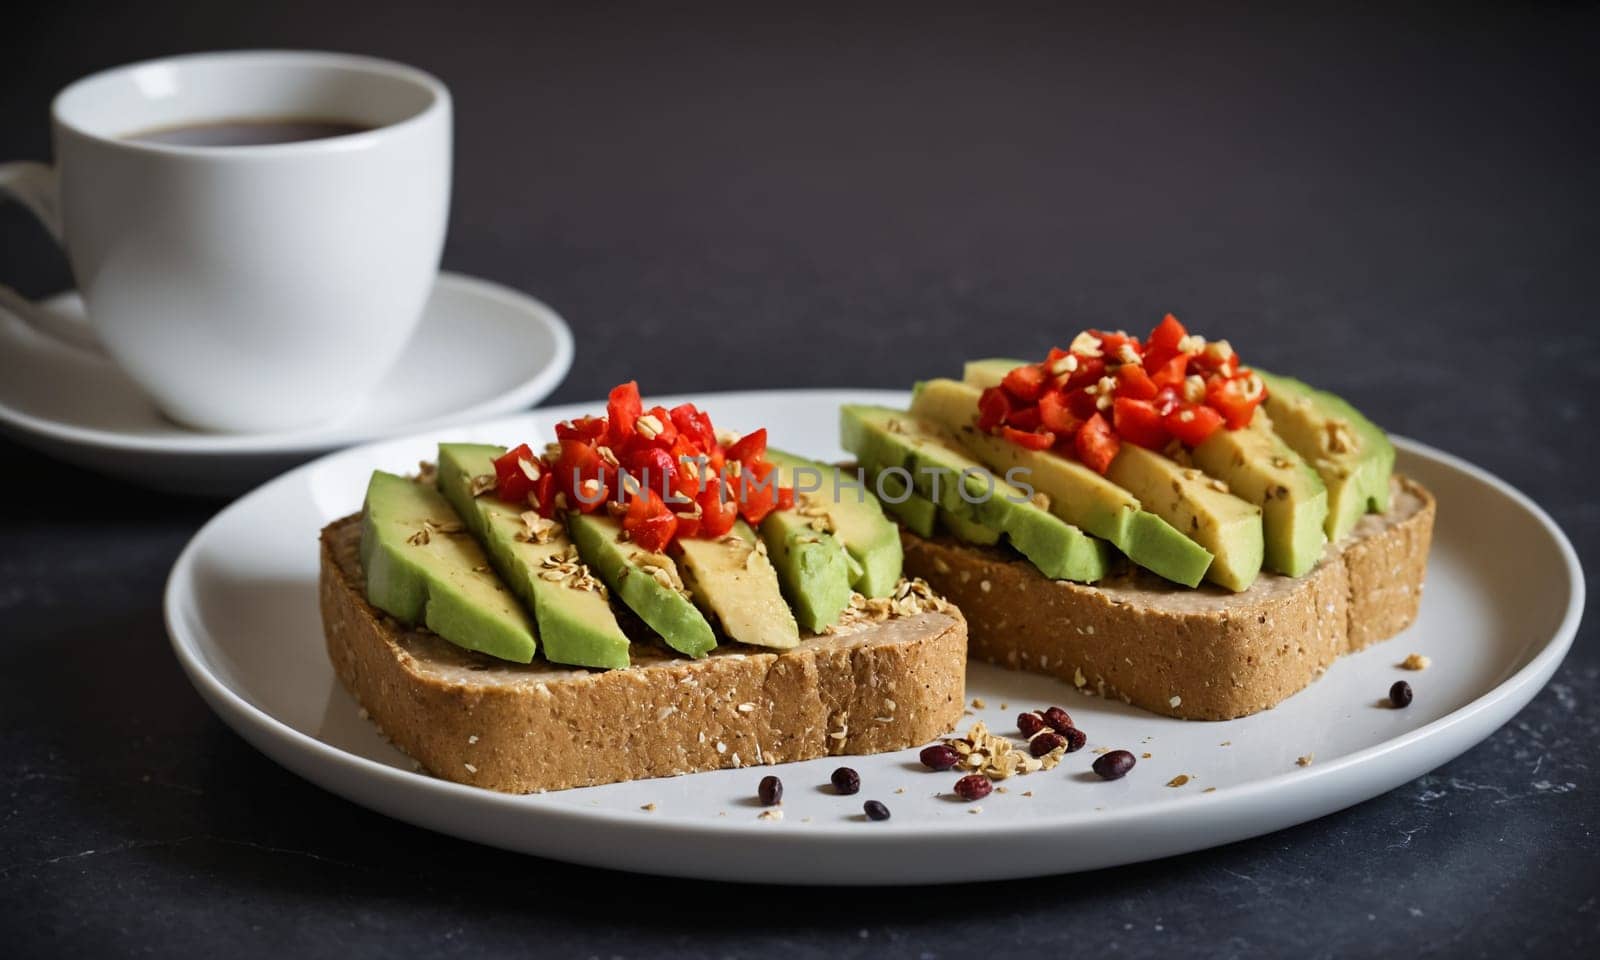 Stylized photograph of avocado toast on toasted rye bread, topped with sesame seeds, chopped red pepper, and a drizzle of olive oil. Served on a ceramic plate with a modern coffee cup